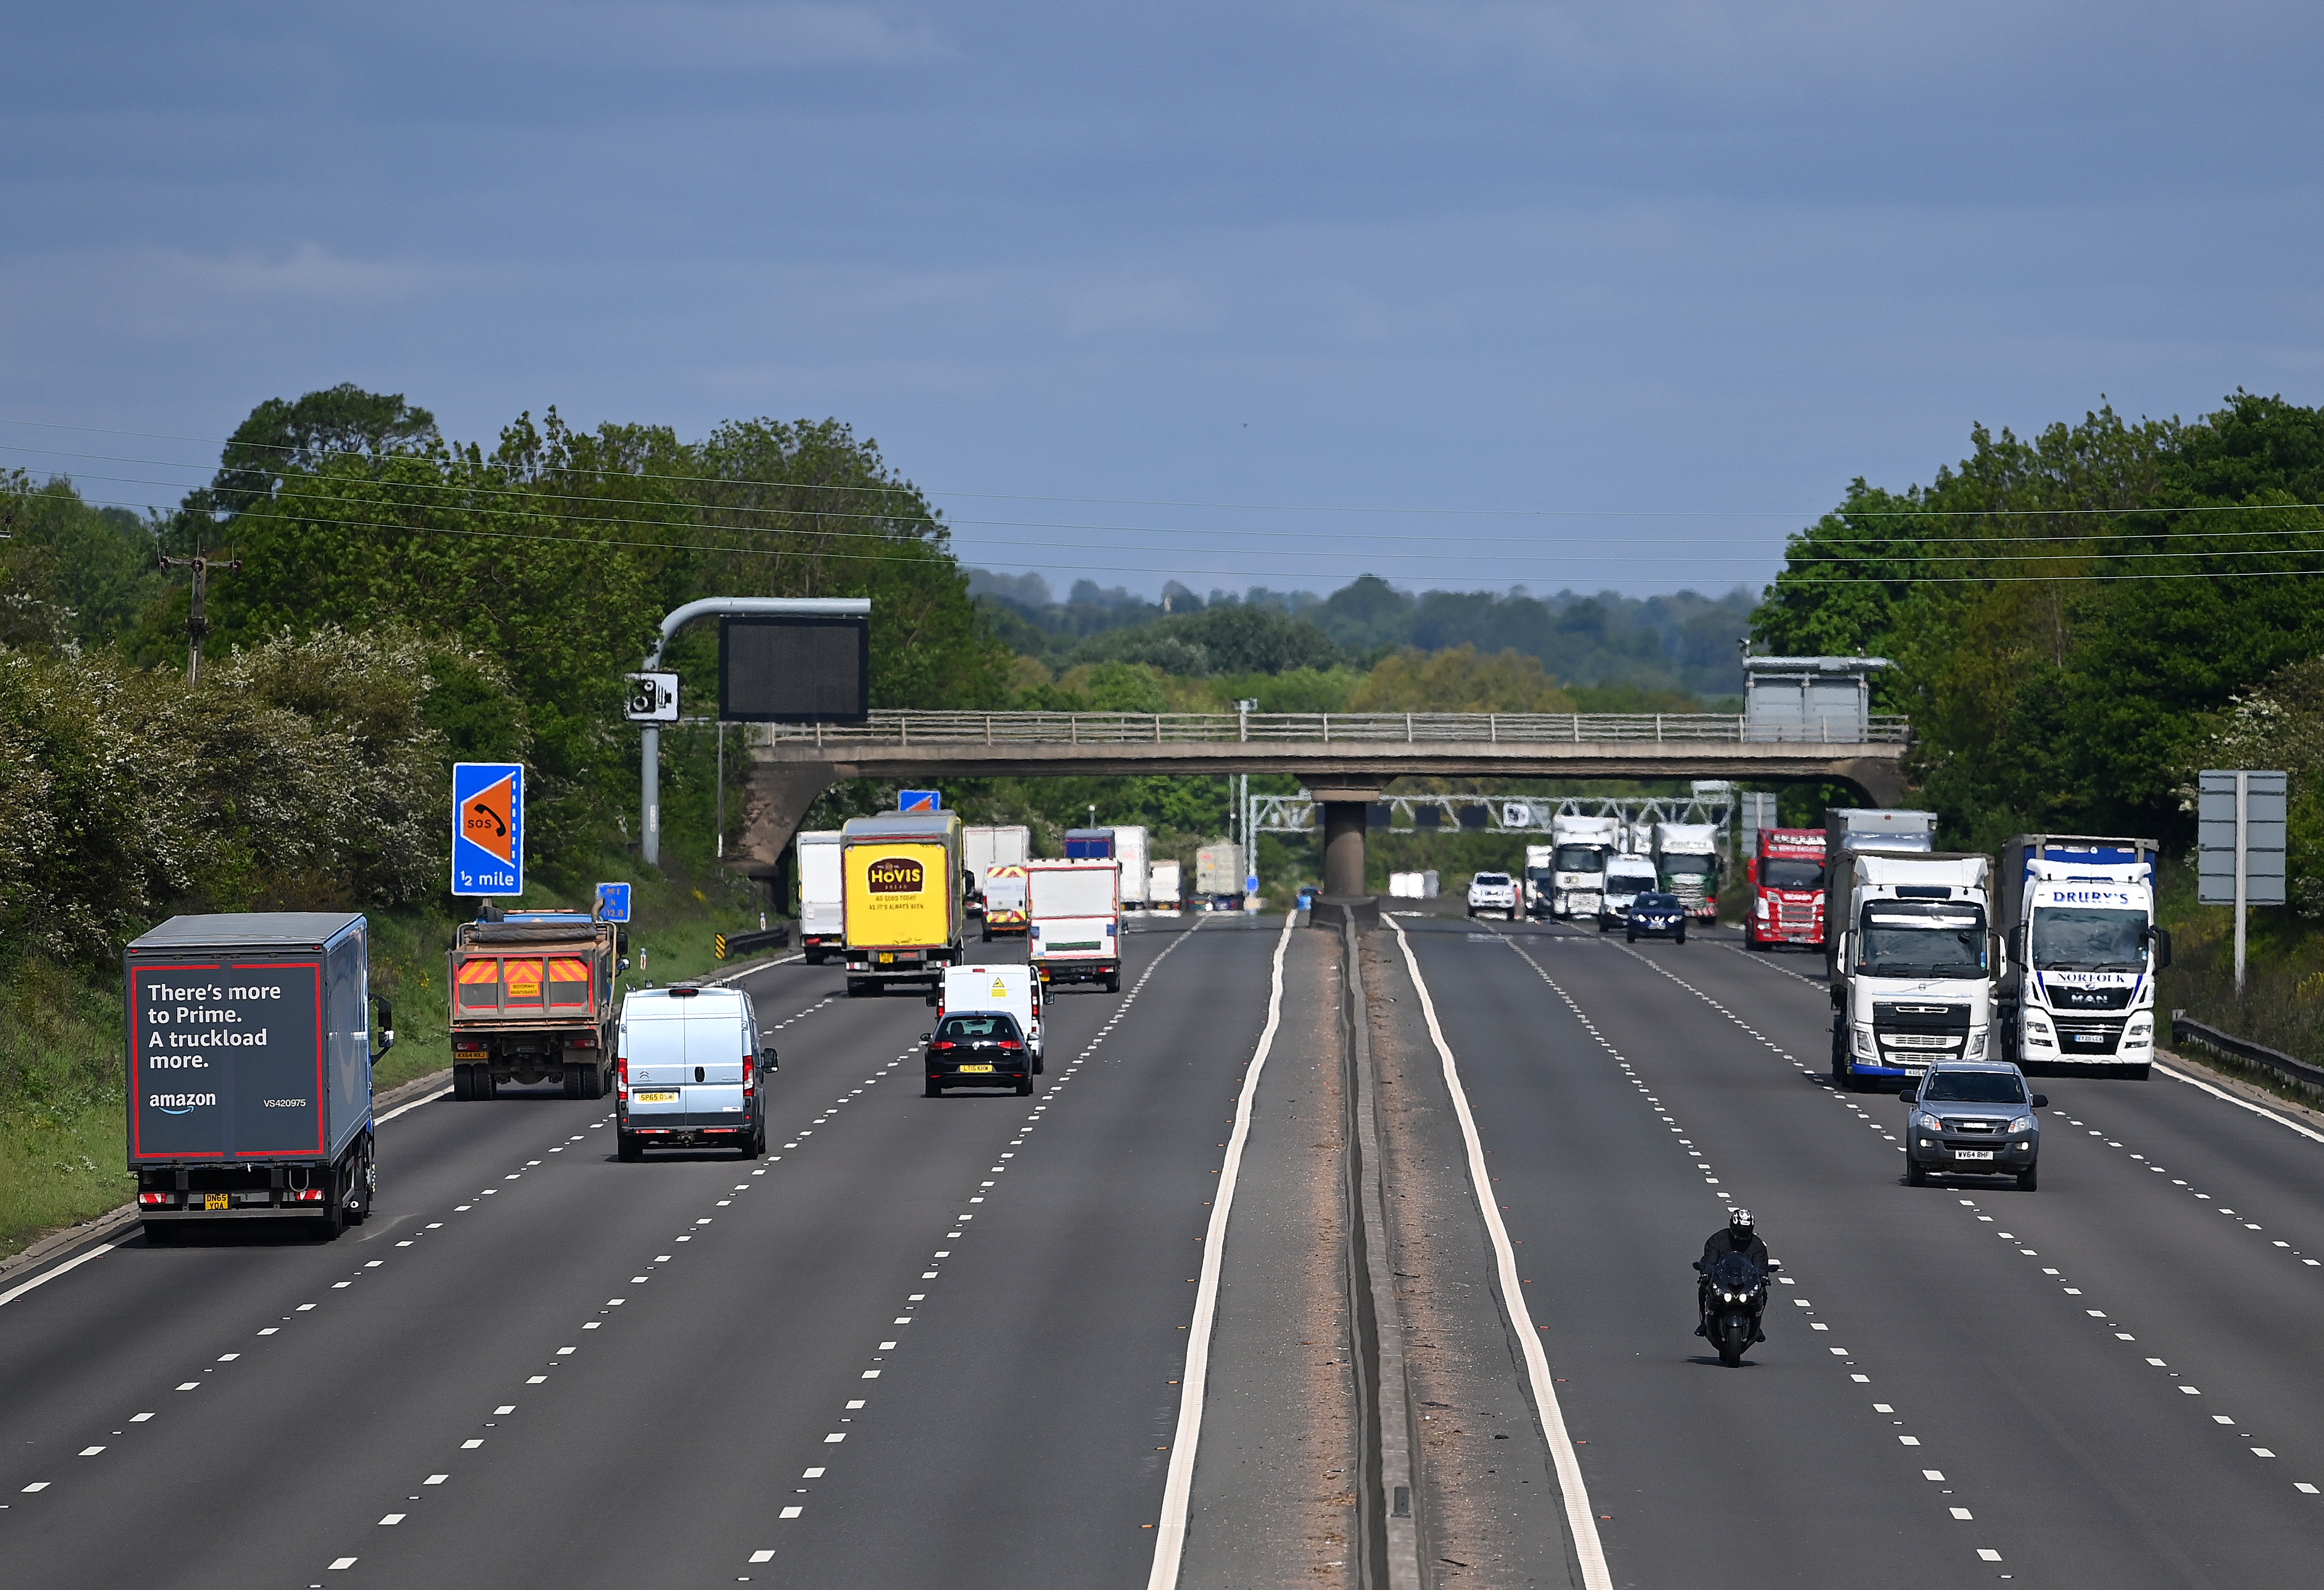 Climate crisis: Motorway speed limits ‘to be cut to 60mph’ to reduce emissions and pollution